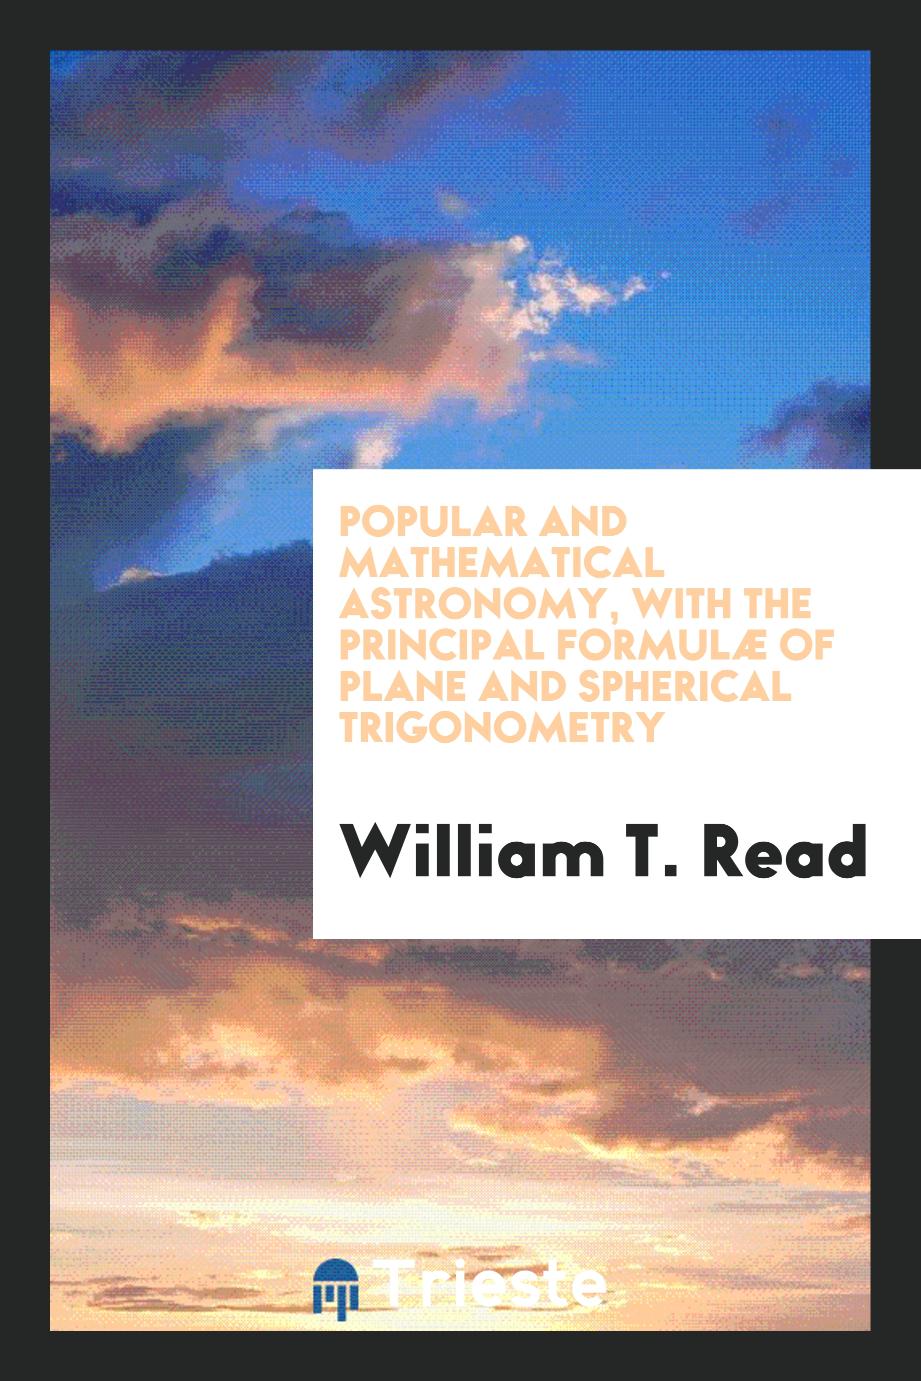 Popular and Mathematical Astronomy, with the Principal Formulæ of Plane and Spherical Trigonometry